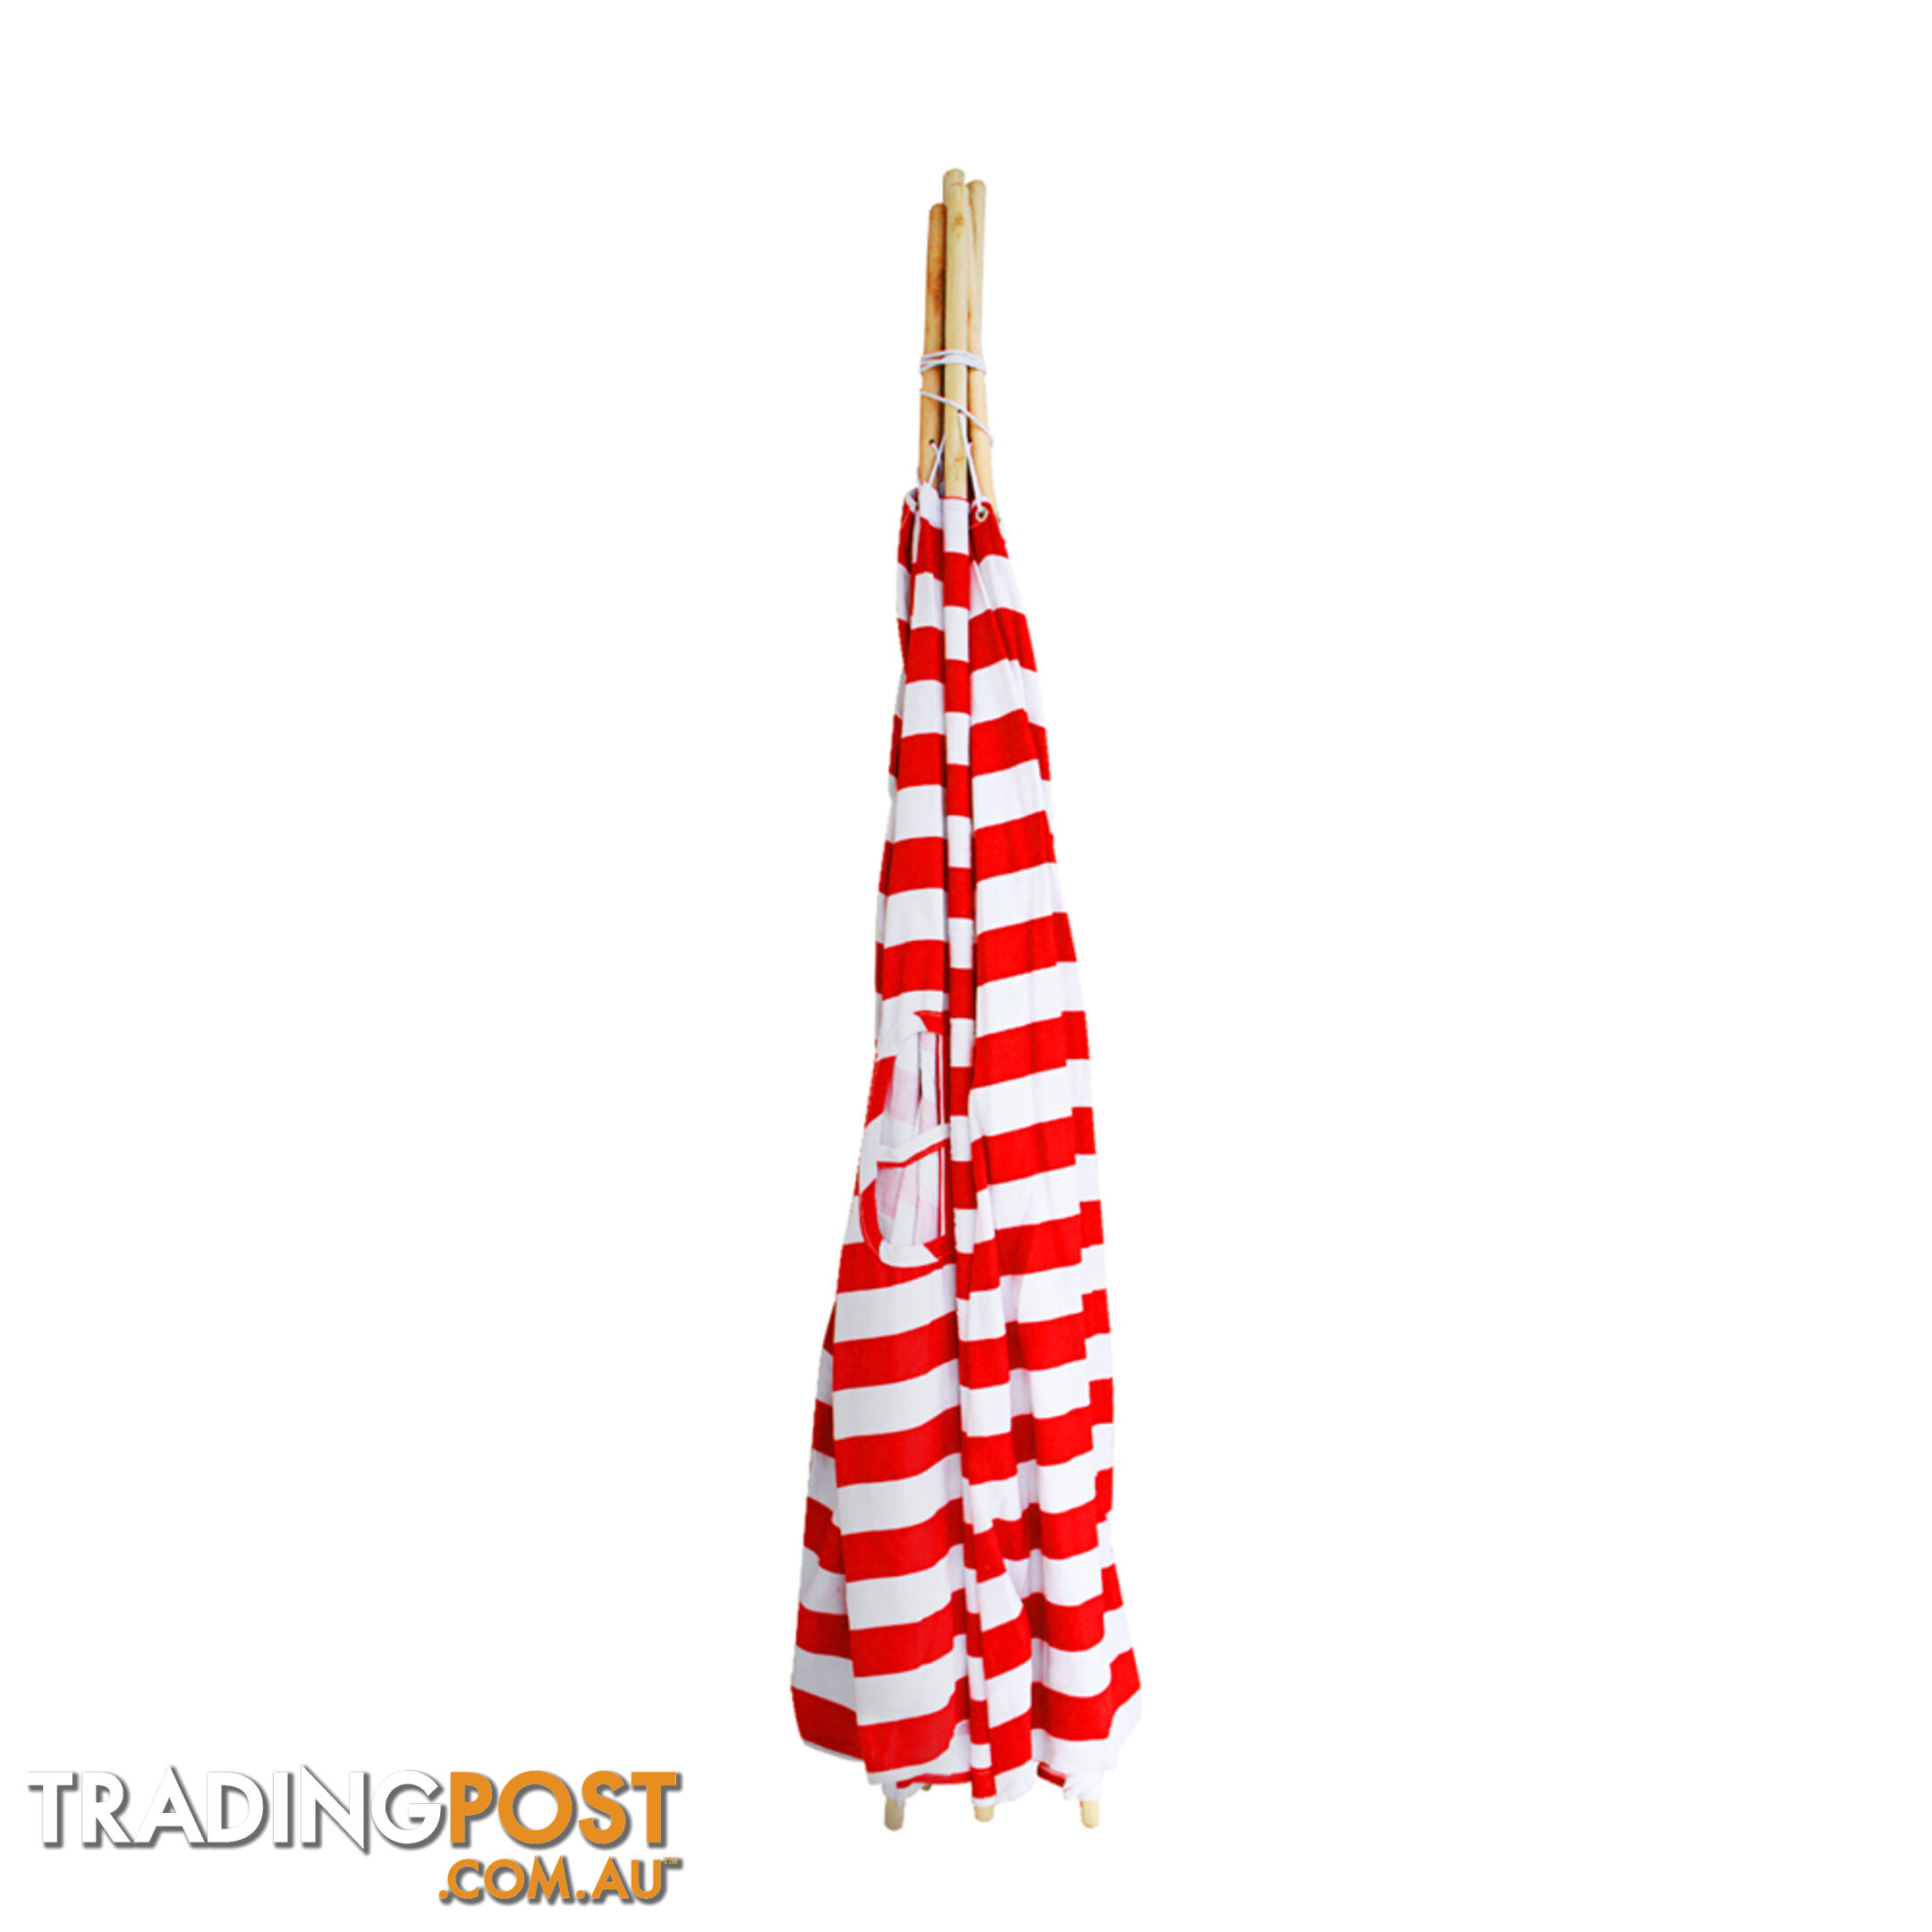 4 Poles Teepee Tent w/ Storage Bag Red